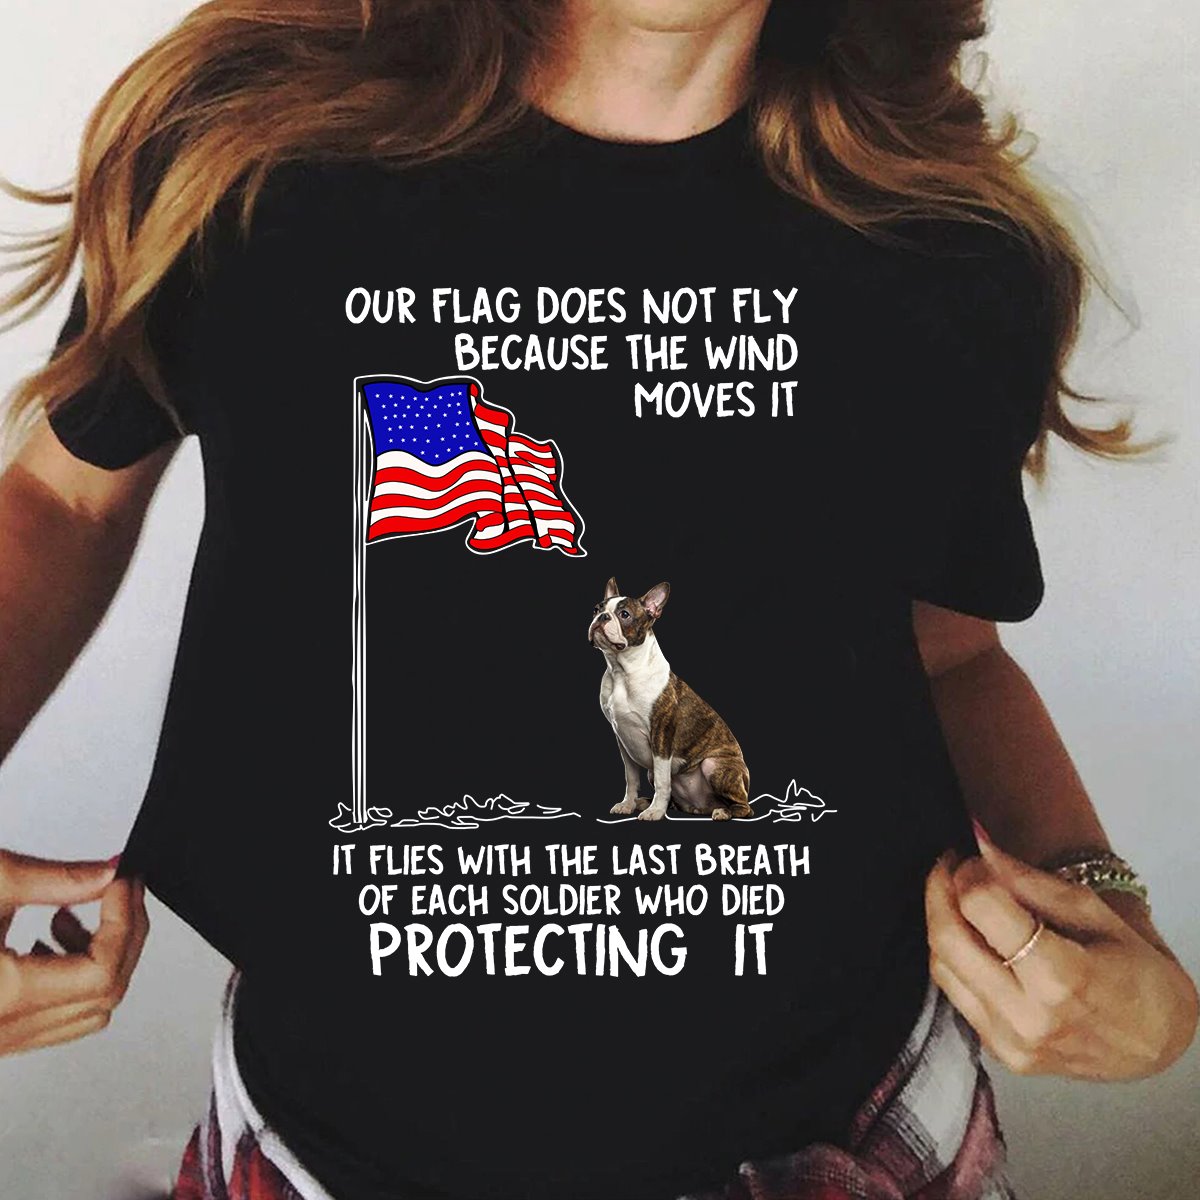 Our flag does not fly because the wind moves it - America flag, frenchie dog, independence day